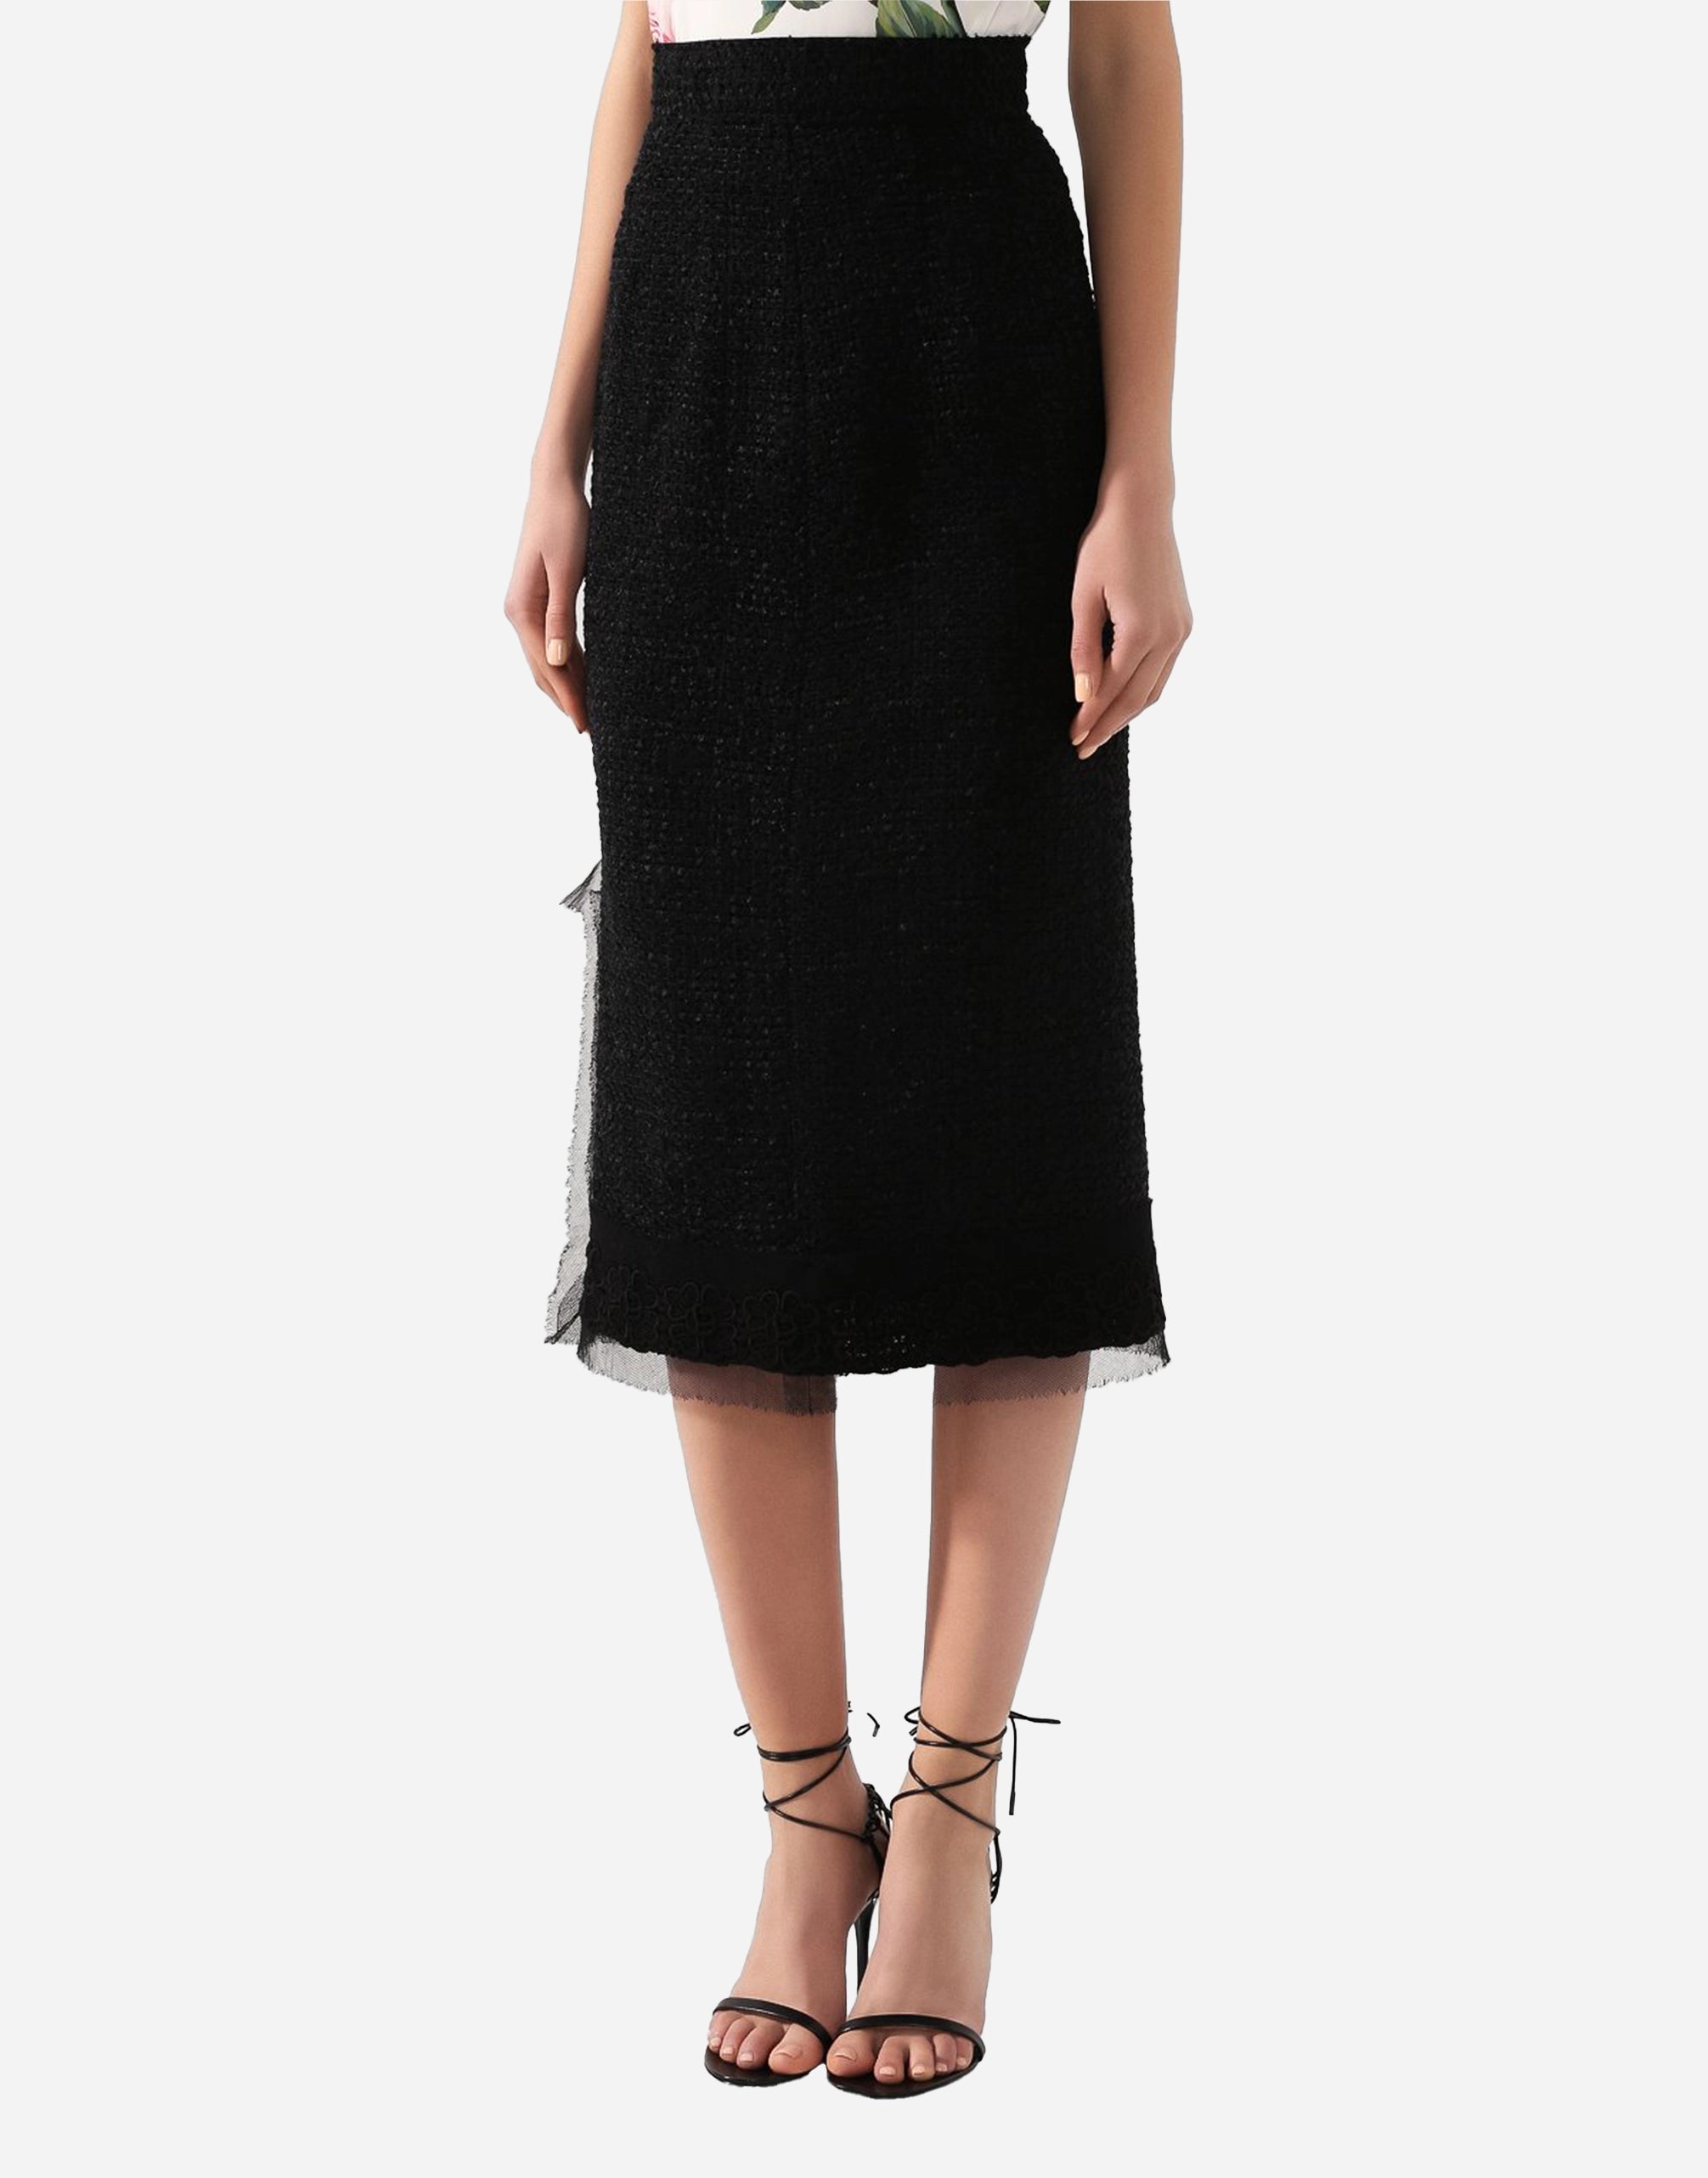 Dolce & Gabbana Mesh And Guipure Lace-Trimmed Tweed Midi Skirt